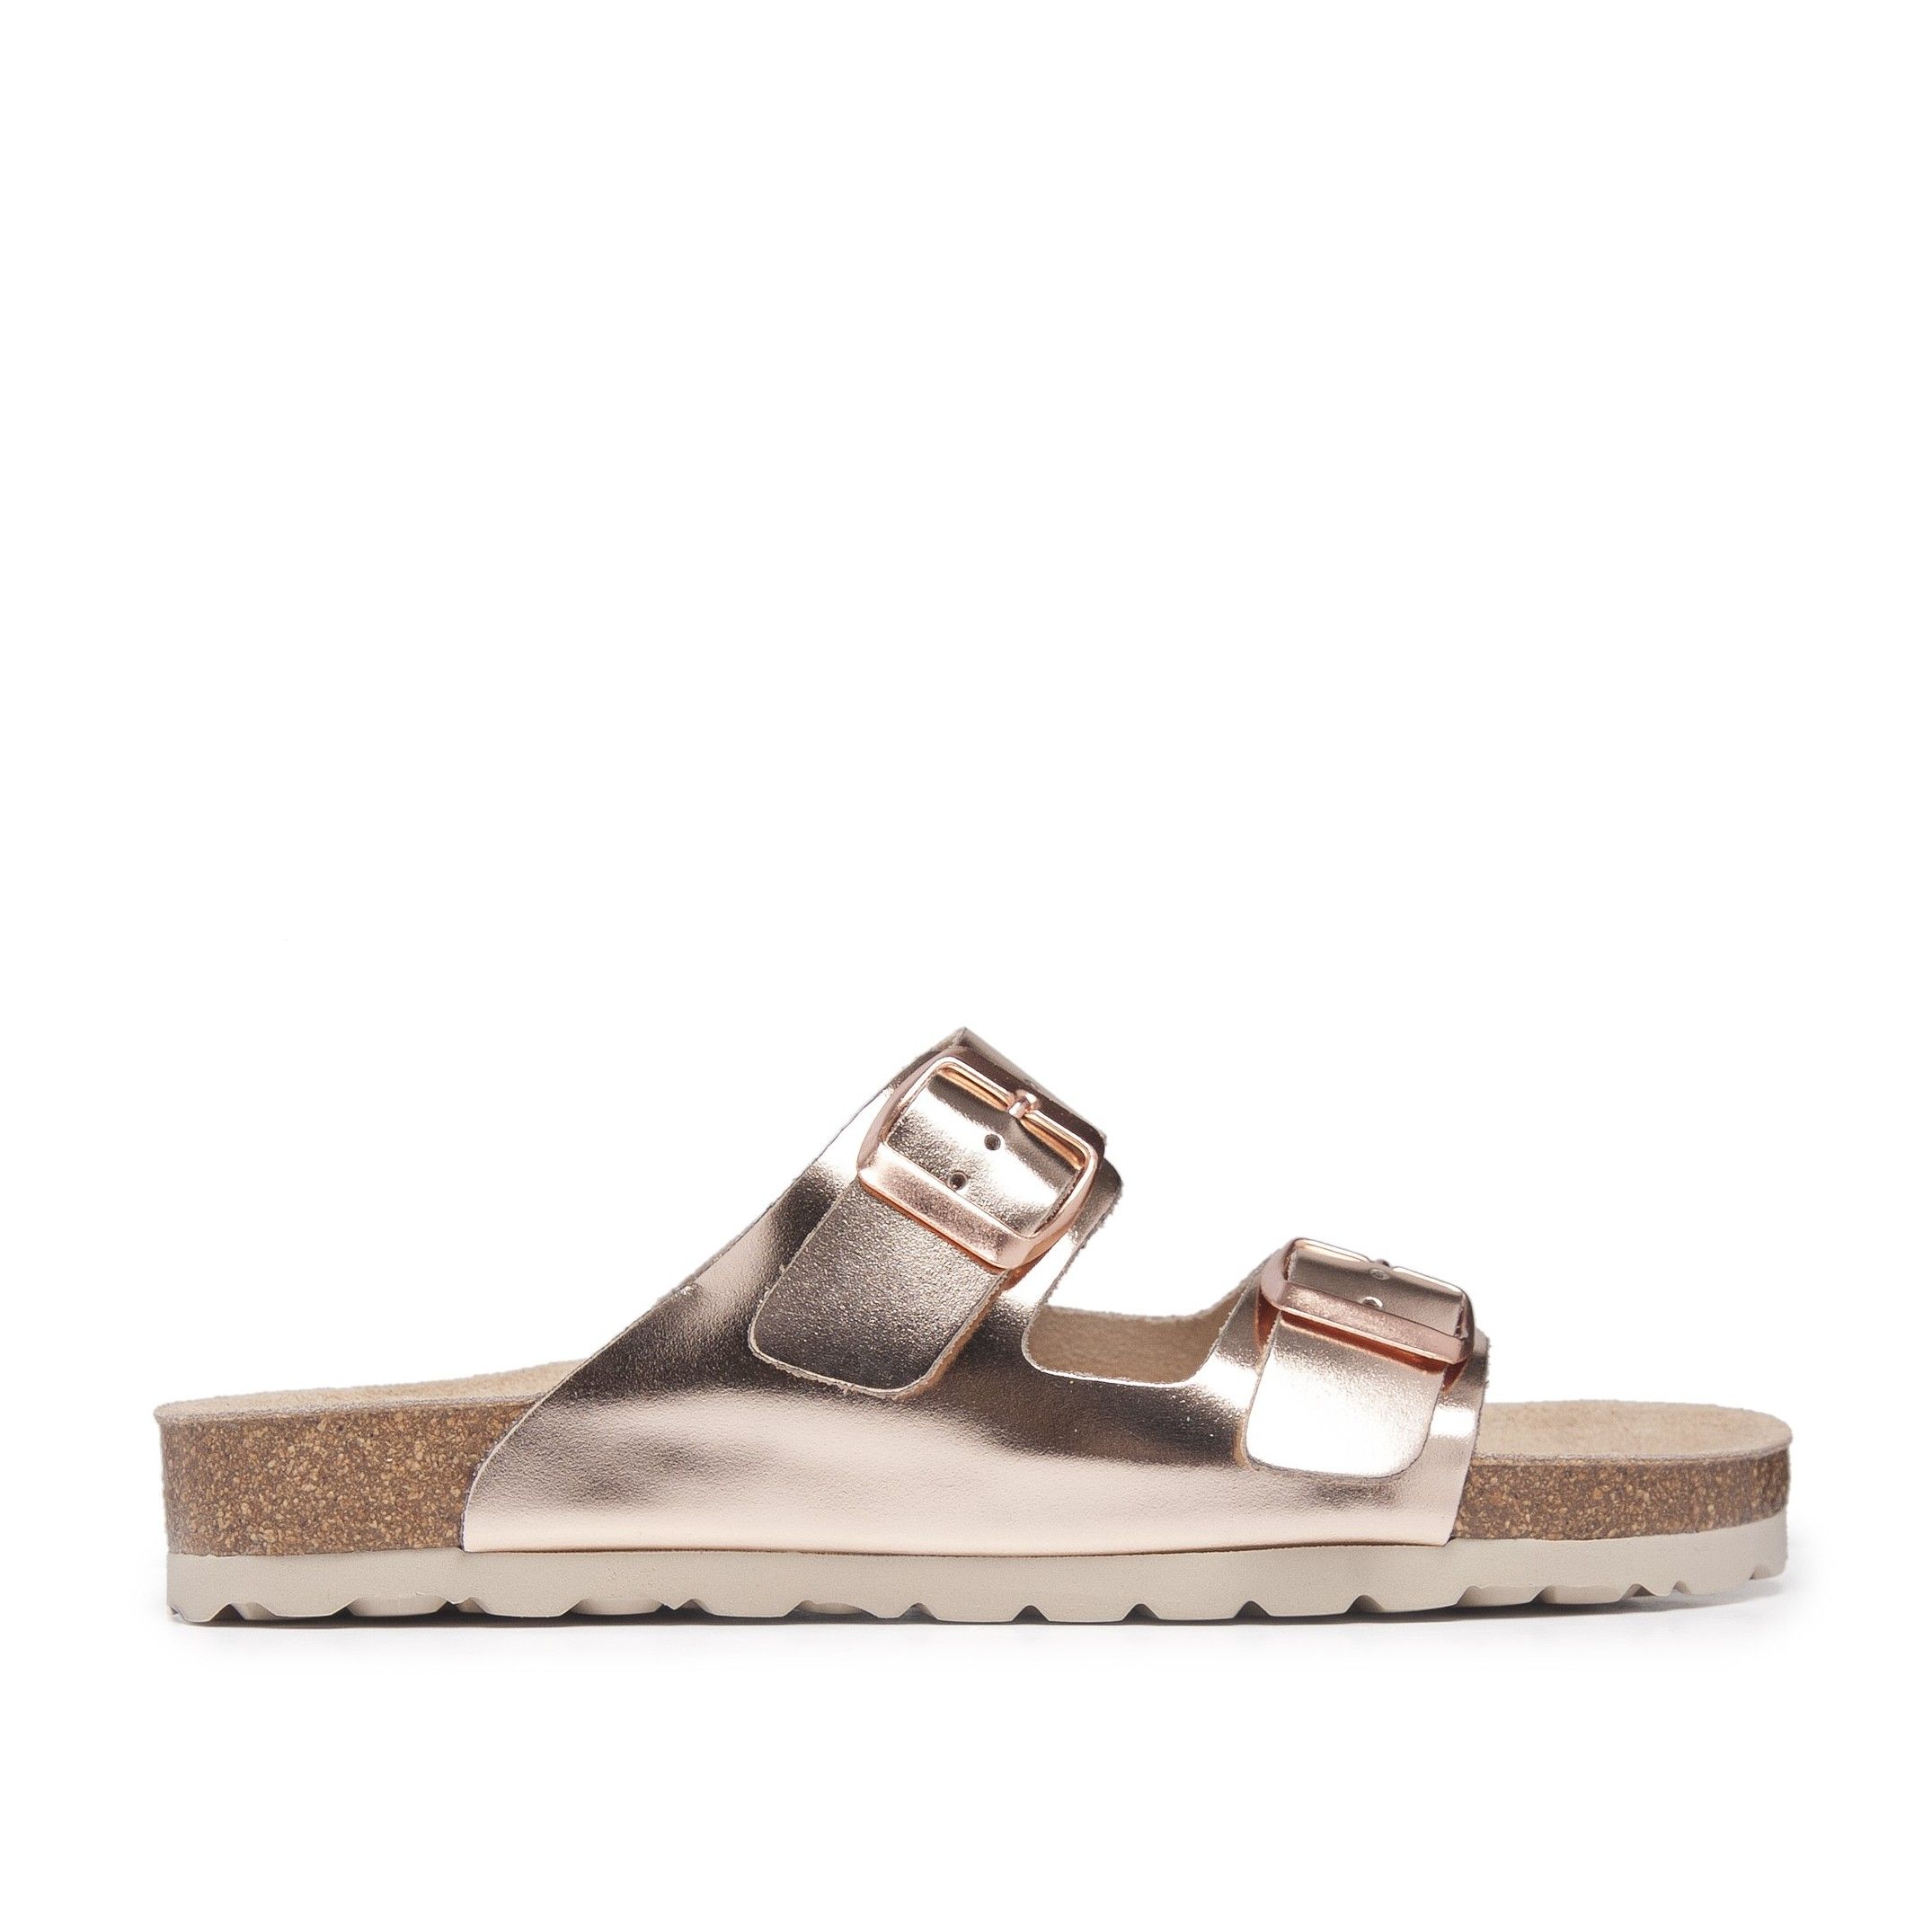 Bio sandal with double leather buckle. Adjustable metal buckle. Upper and inner made of leather. Insole: leather. Platform: 1 cm. Sole: EVA. This product is manufactured in Spain.